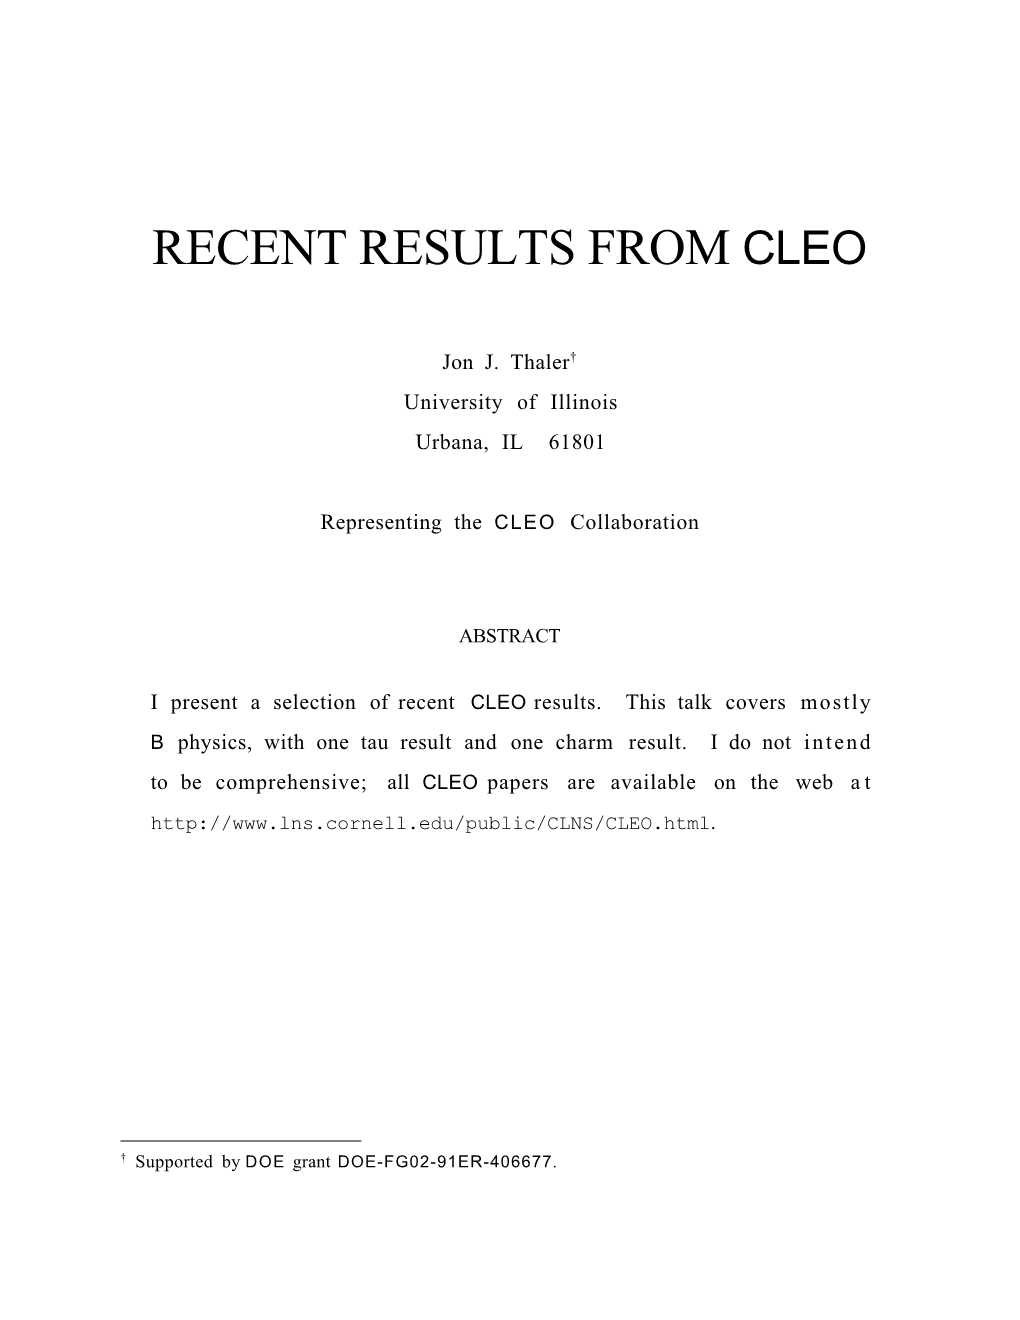 Recent Results from Cleo